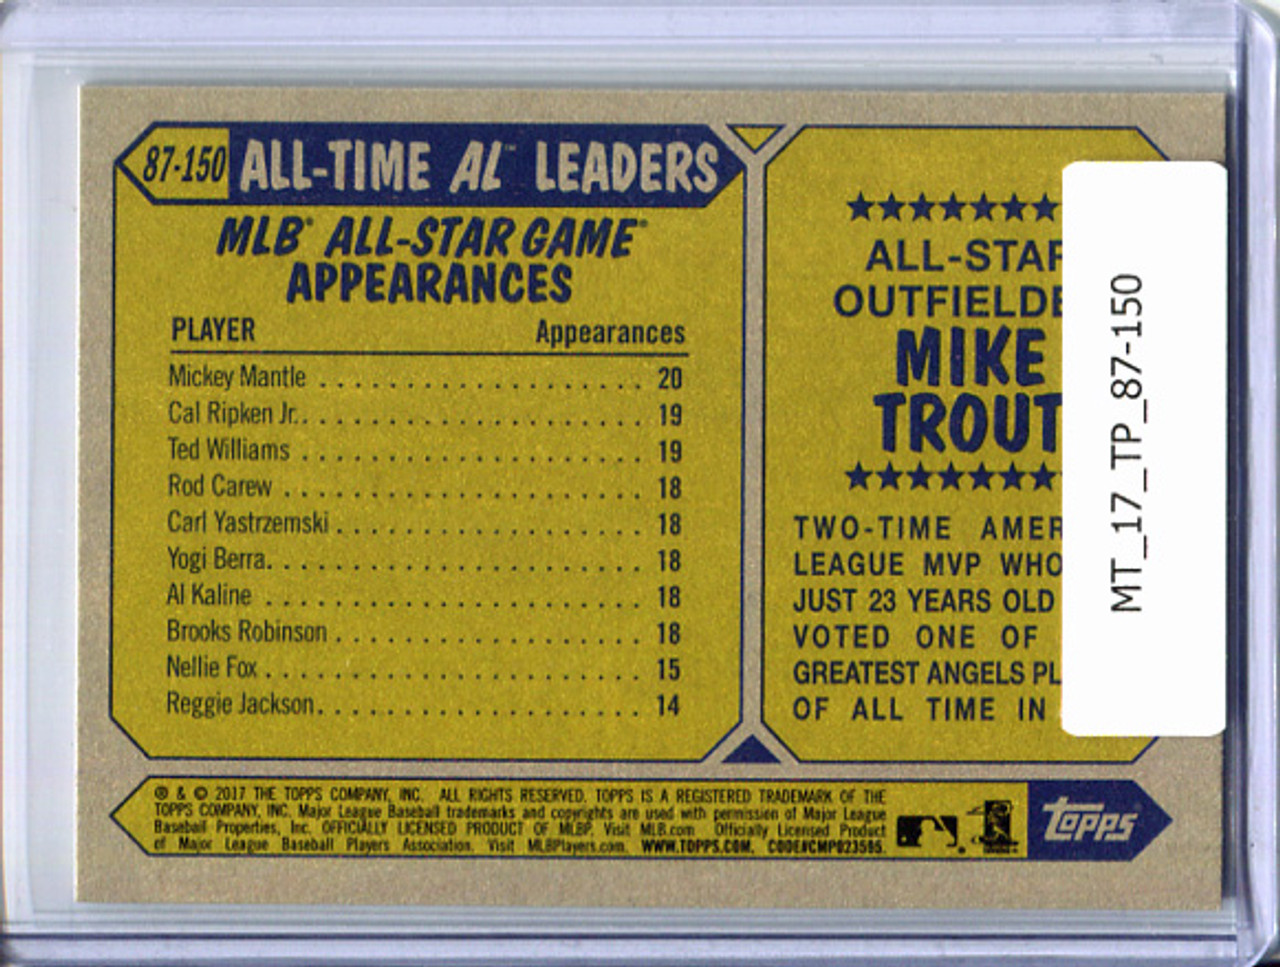 Mike Trout 2017 Topps, 1987 Topps All-Star #87-150